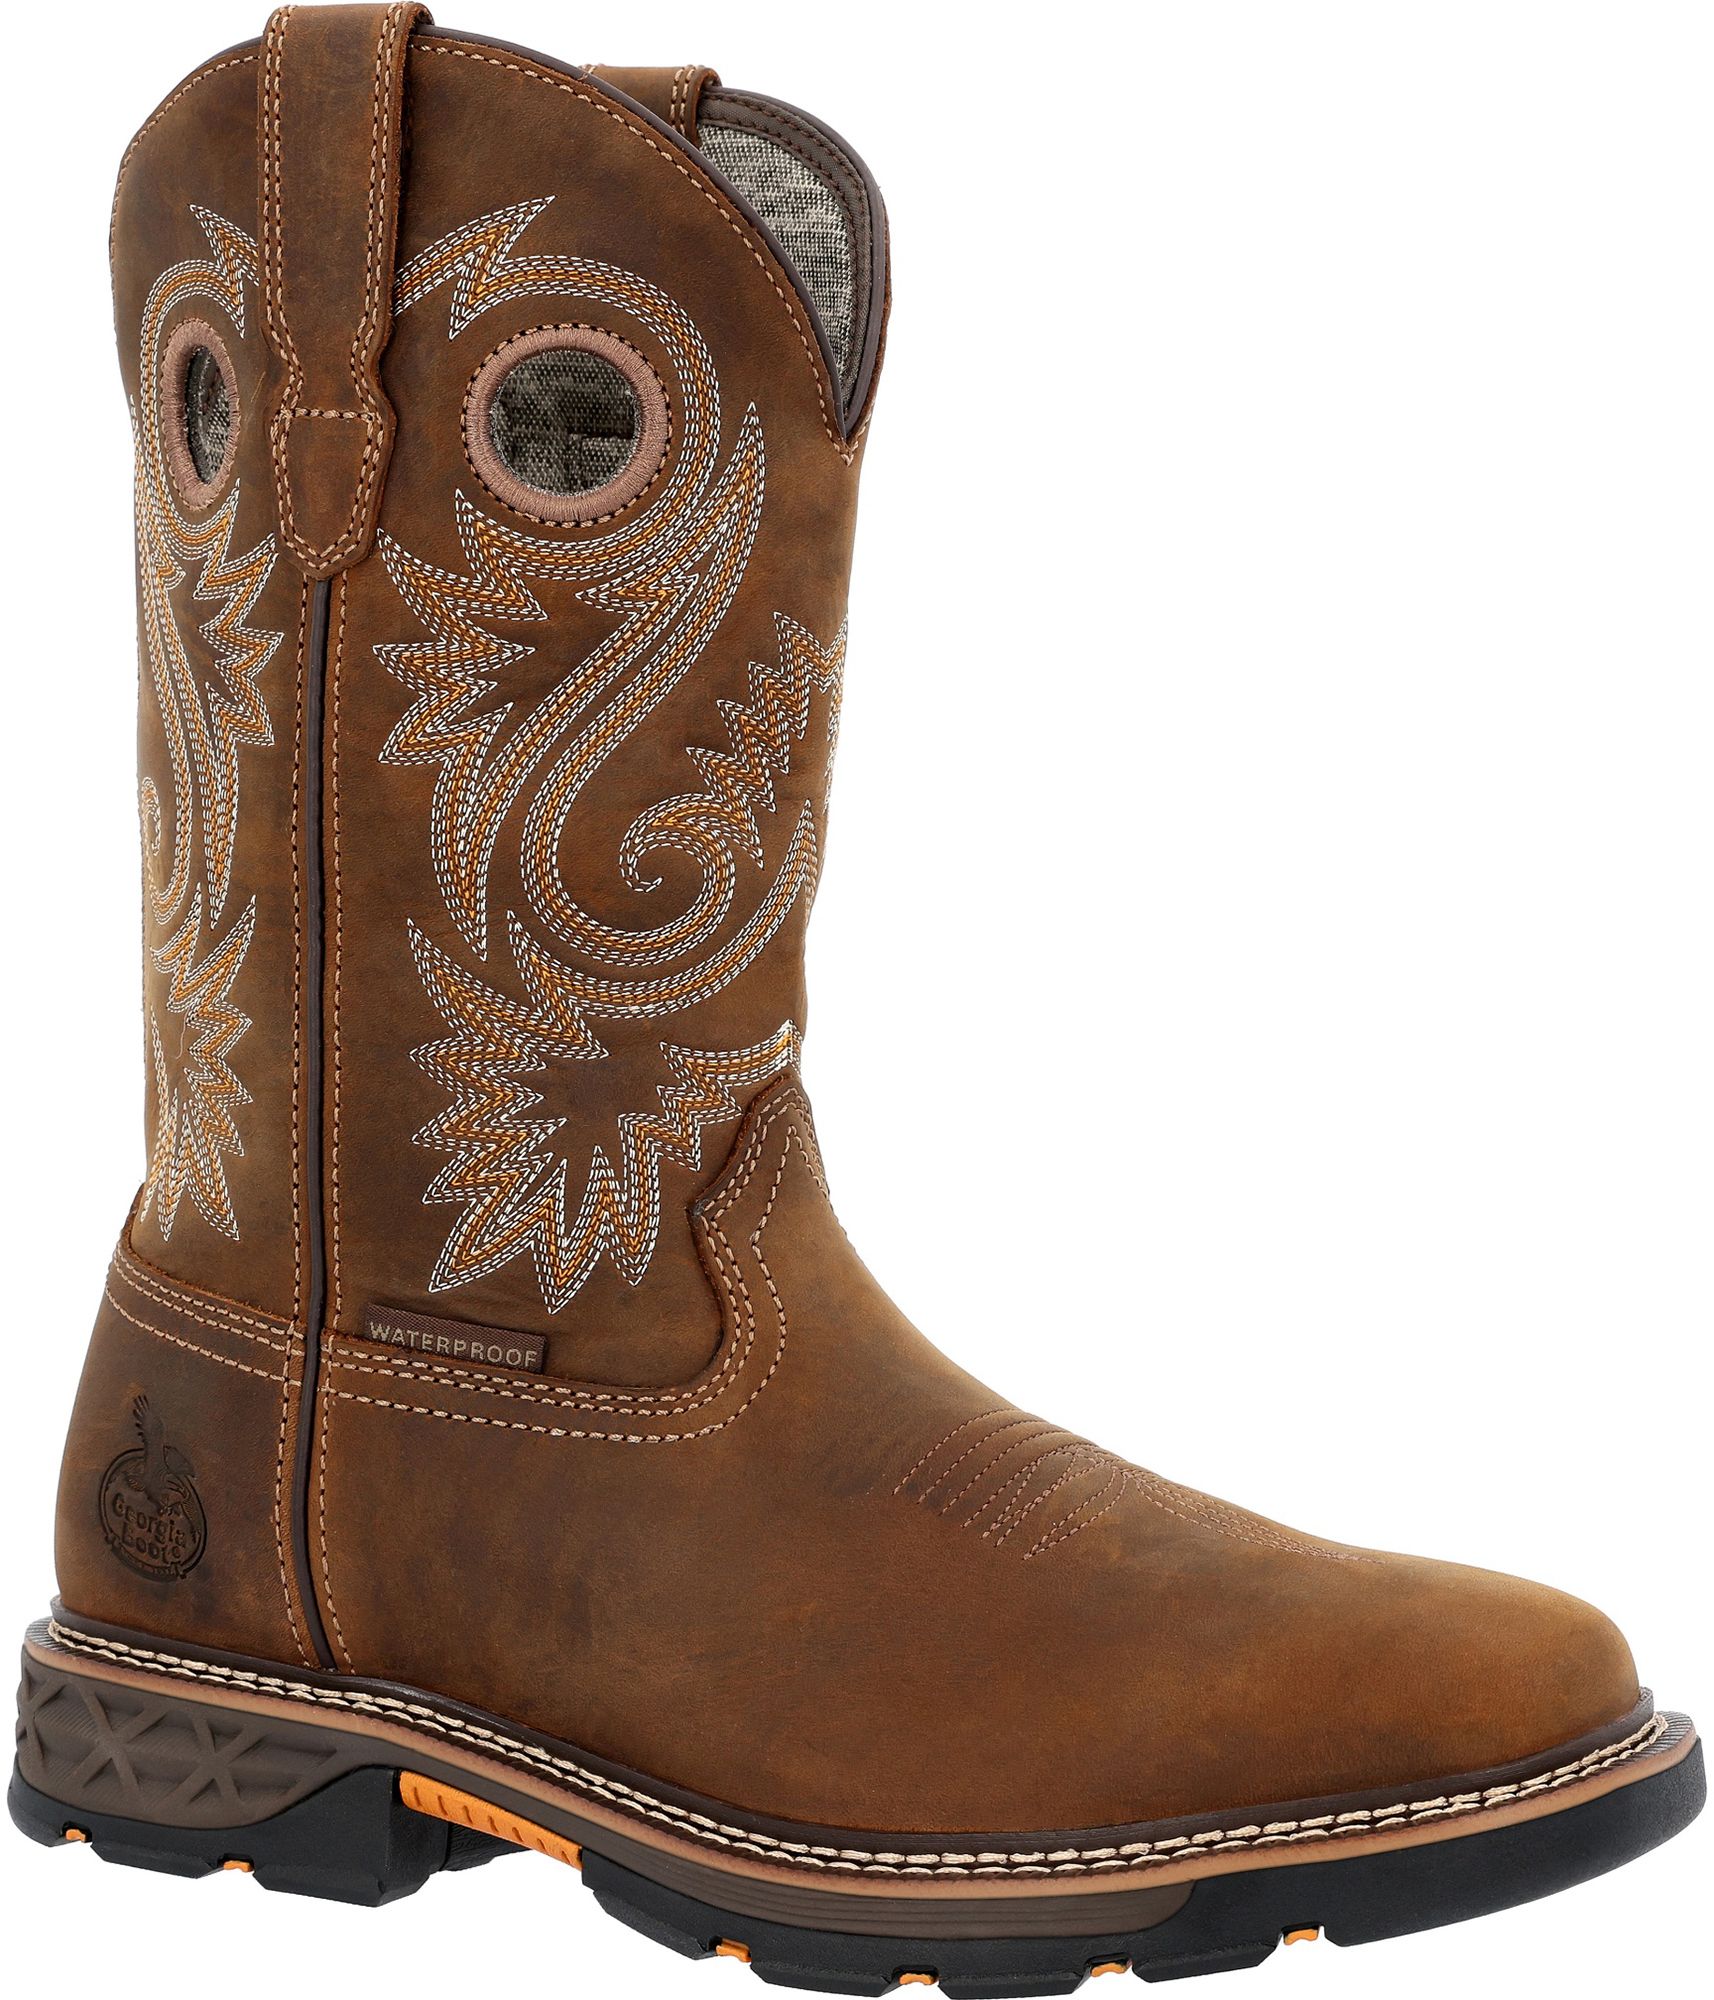 Georgia Boots Men's 11" Carbo-Tec FLX Alloy Toe Waterproof Pull-On Work Boots